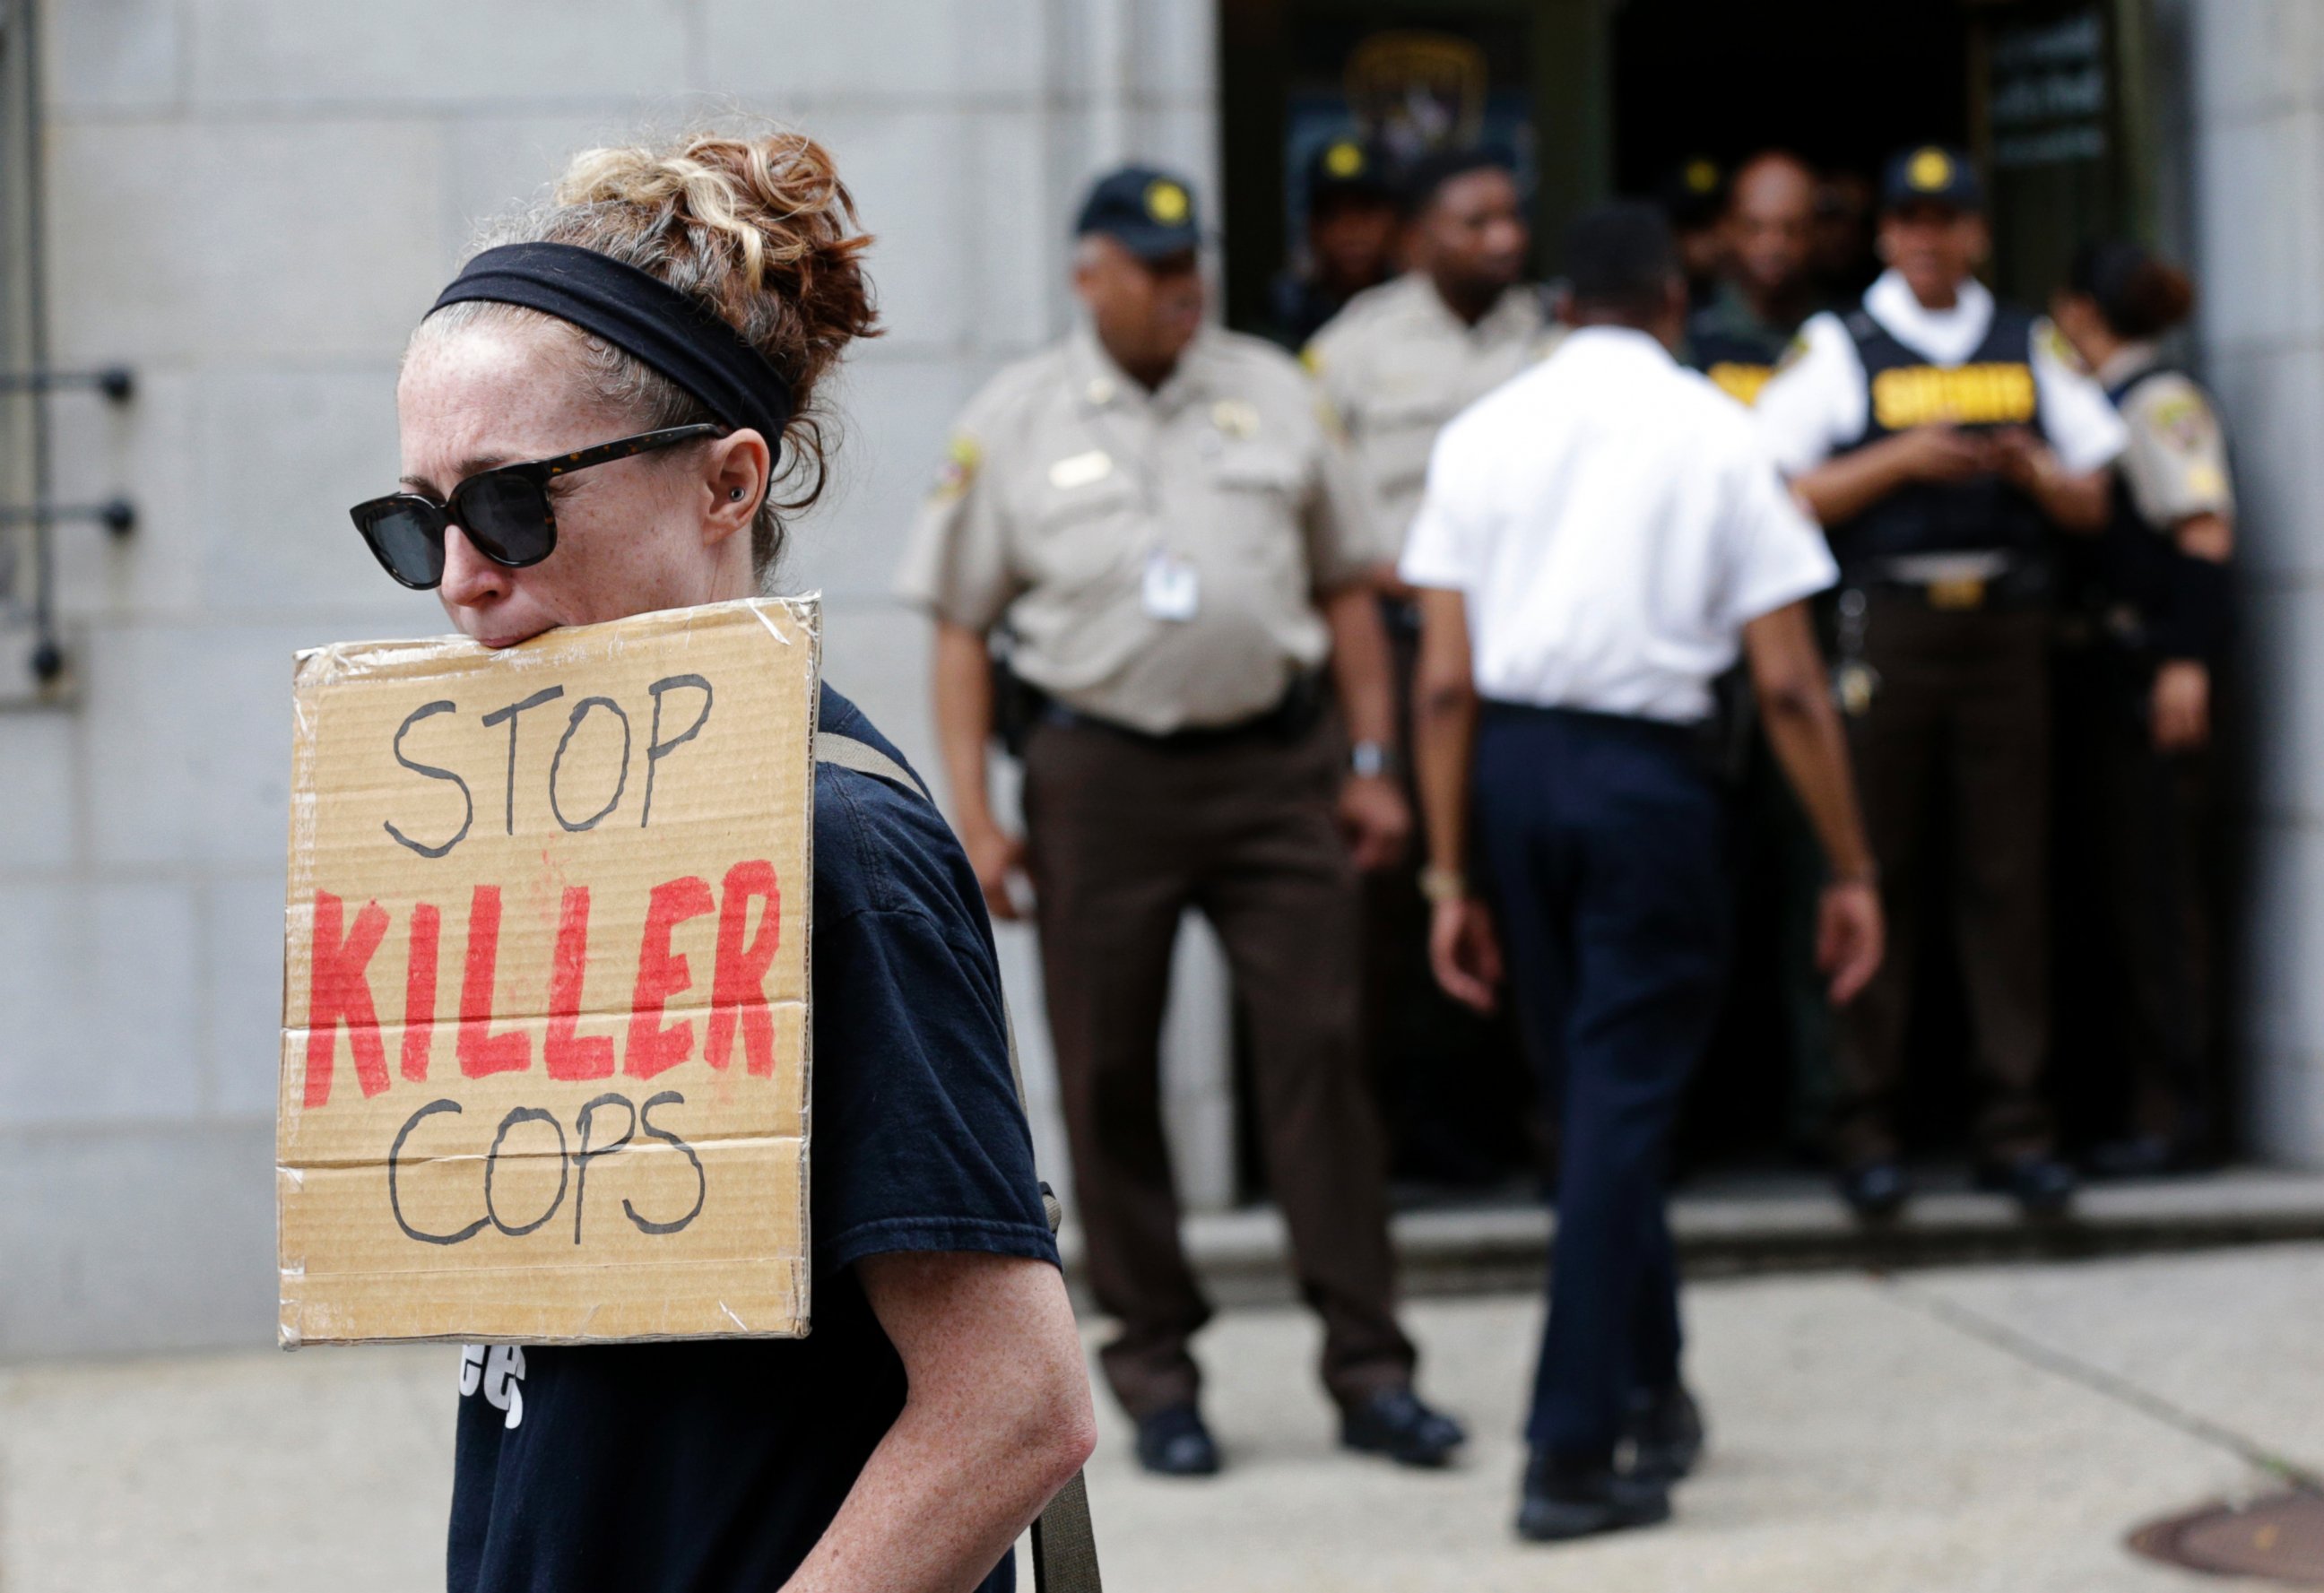 PHOTO: A protester displays a sign outside a courthouse after Officer Caesar Goodson was acquitted of all charges in his trial in Baltimore, June 23, 2016.